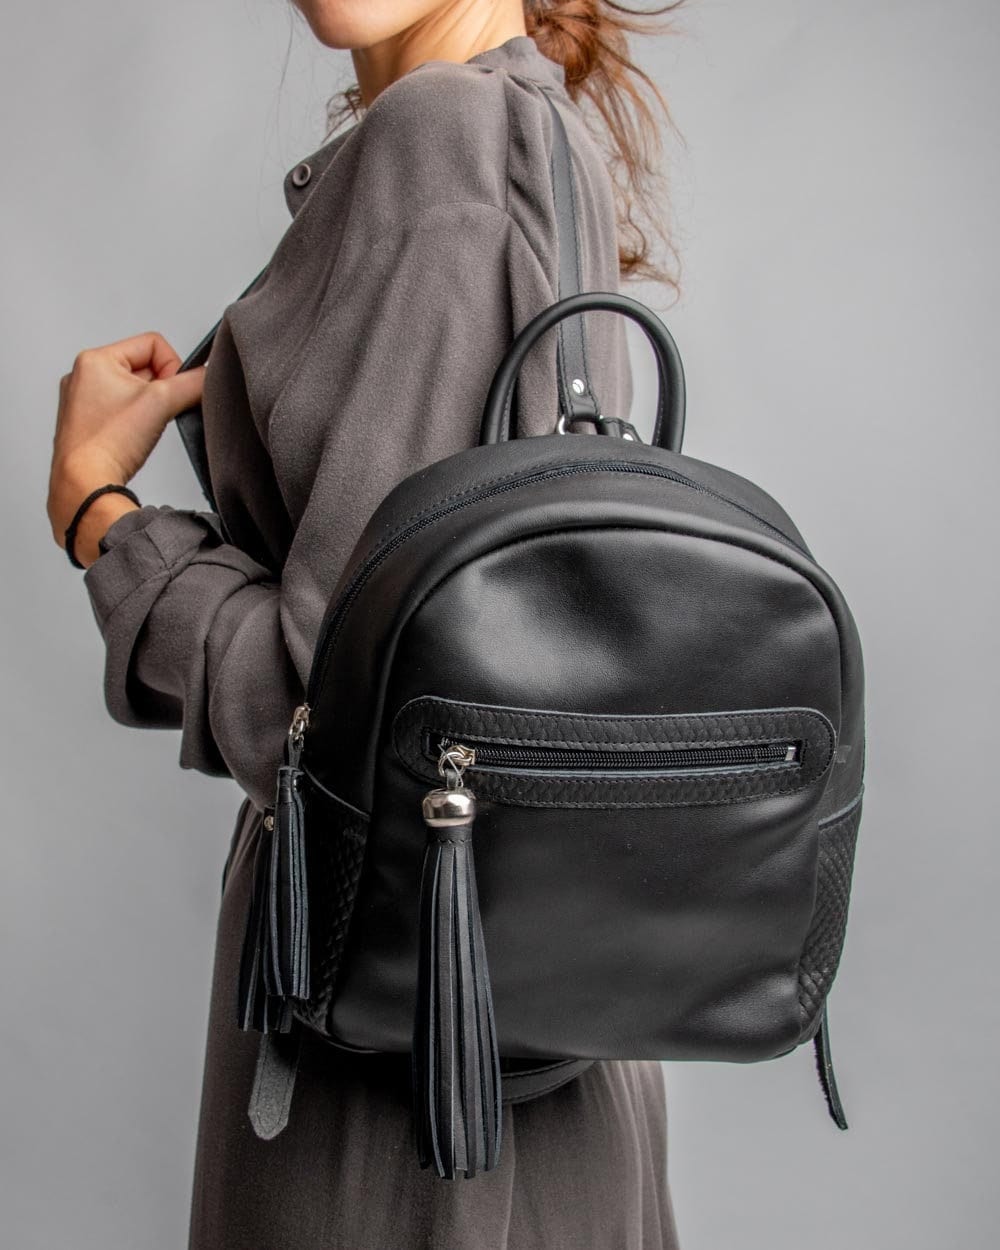 Womens black leather backpack, Soft leather backpack for everyday use, Boho backpack purse